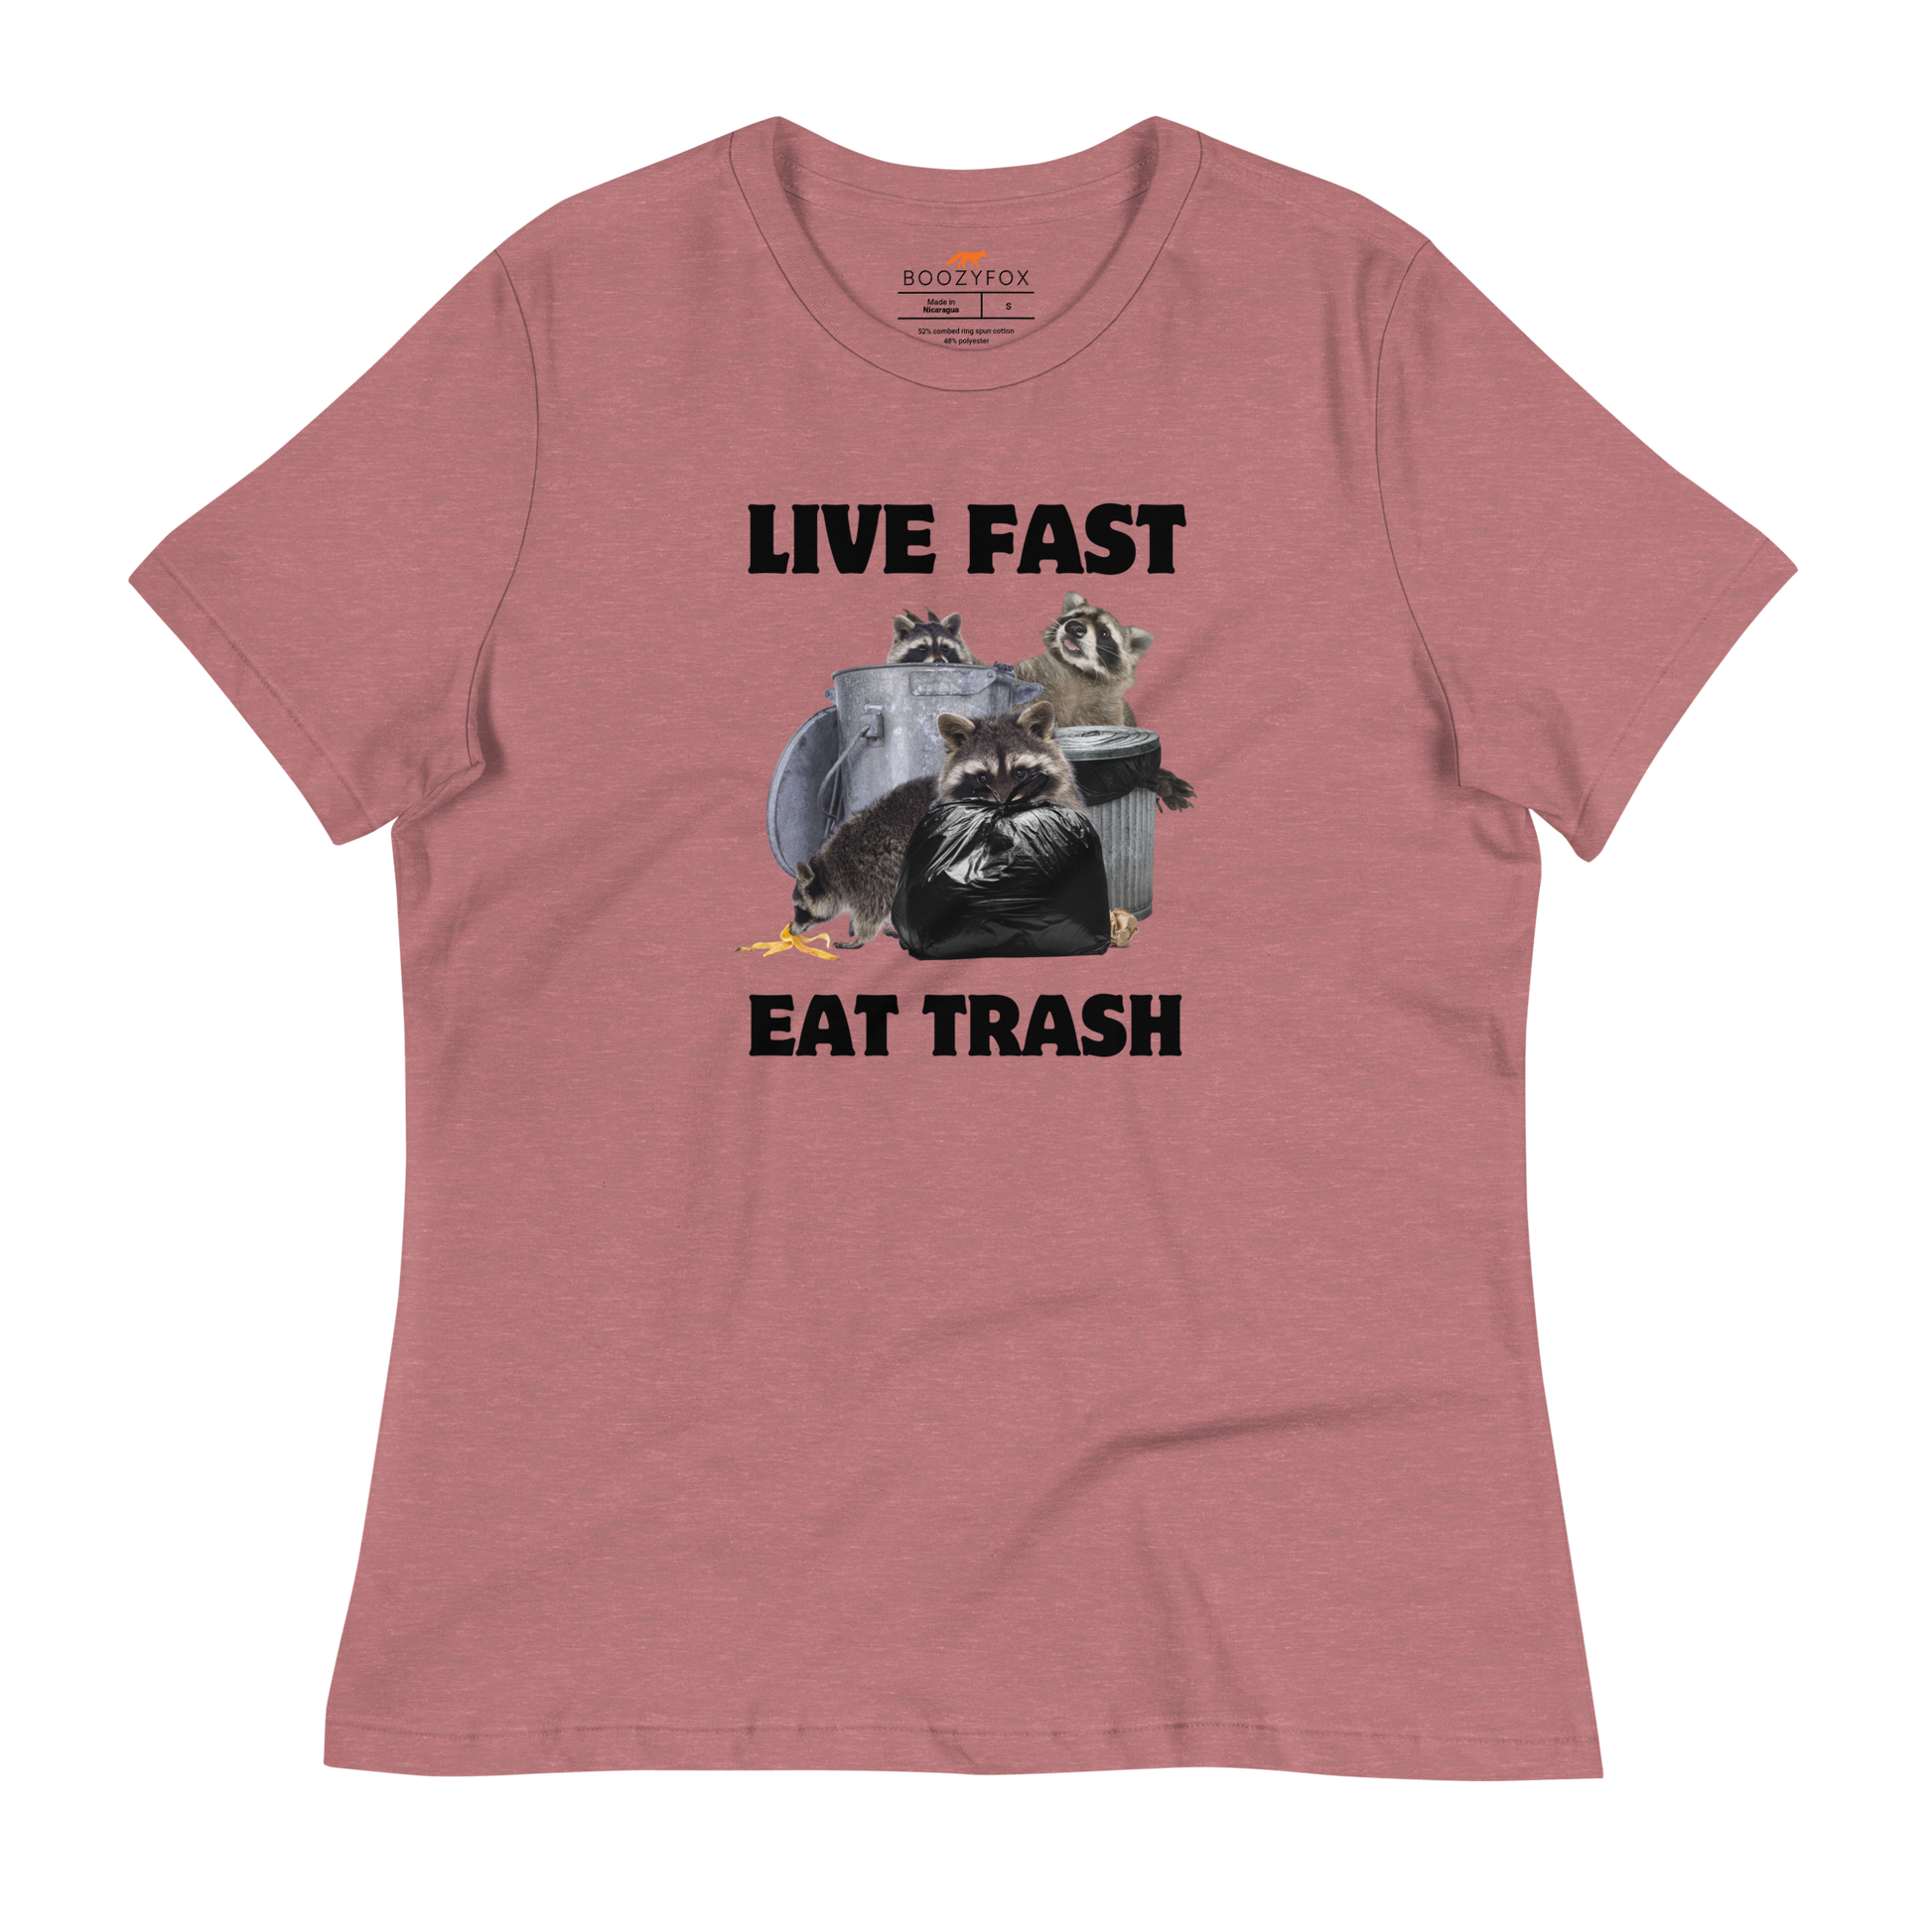 Women's Heather Mauve Raccoon T-Shirt featuring a hilarious Live Fast Eat Trash graphic on the chest - Women's Funny Graphic Raccoon Tees - Boozy Fox